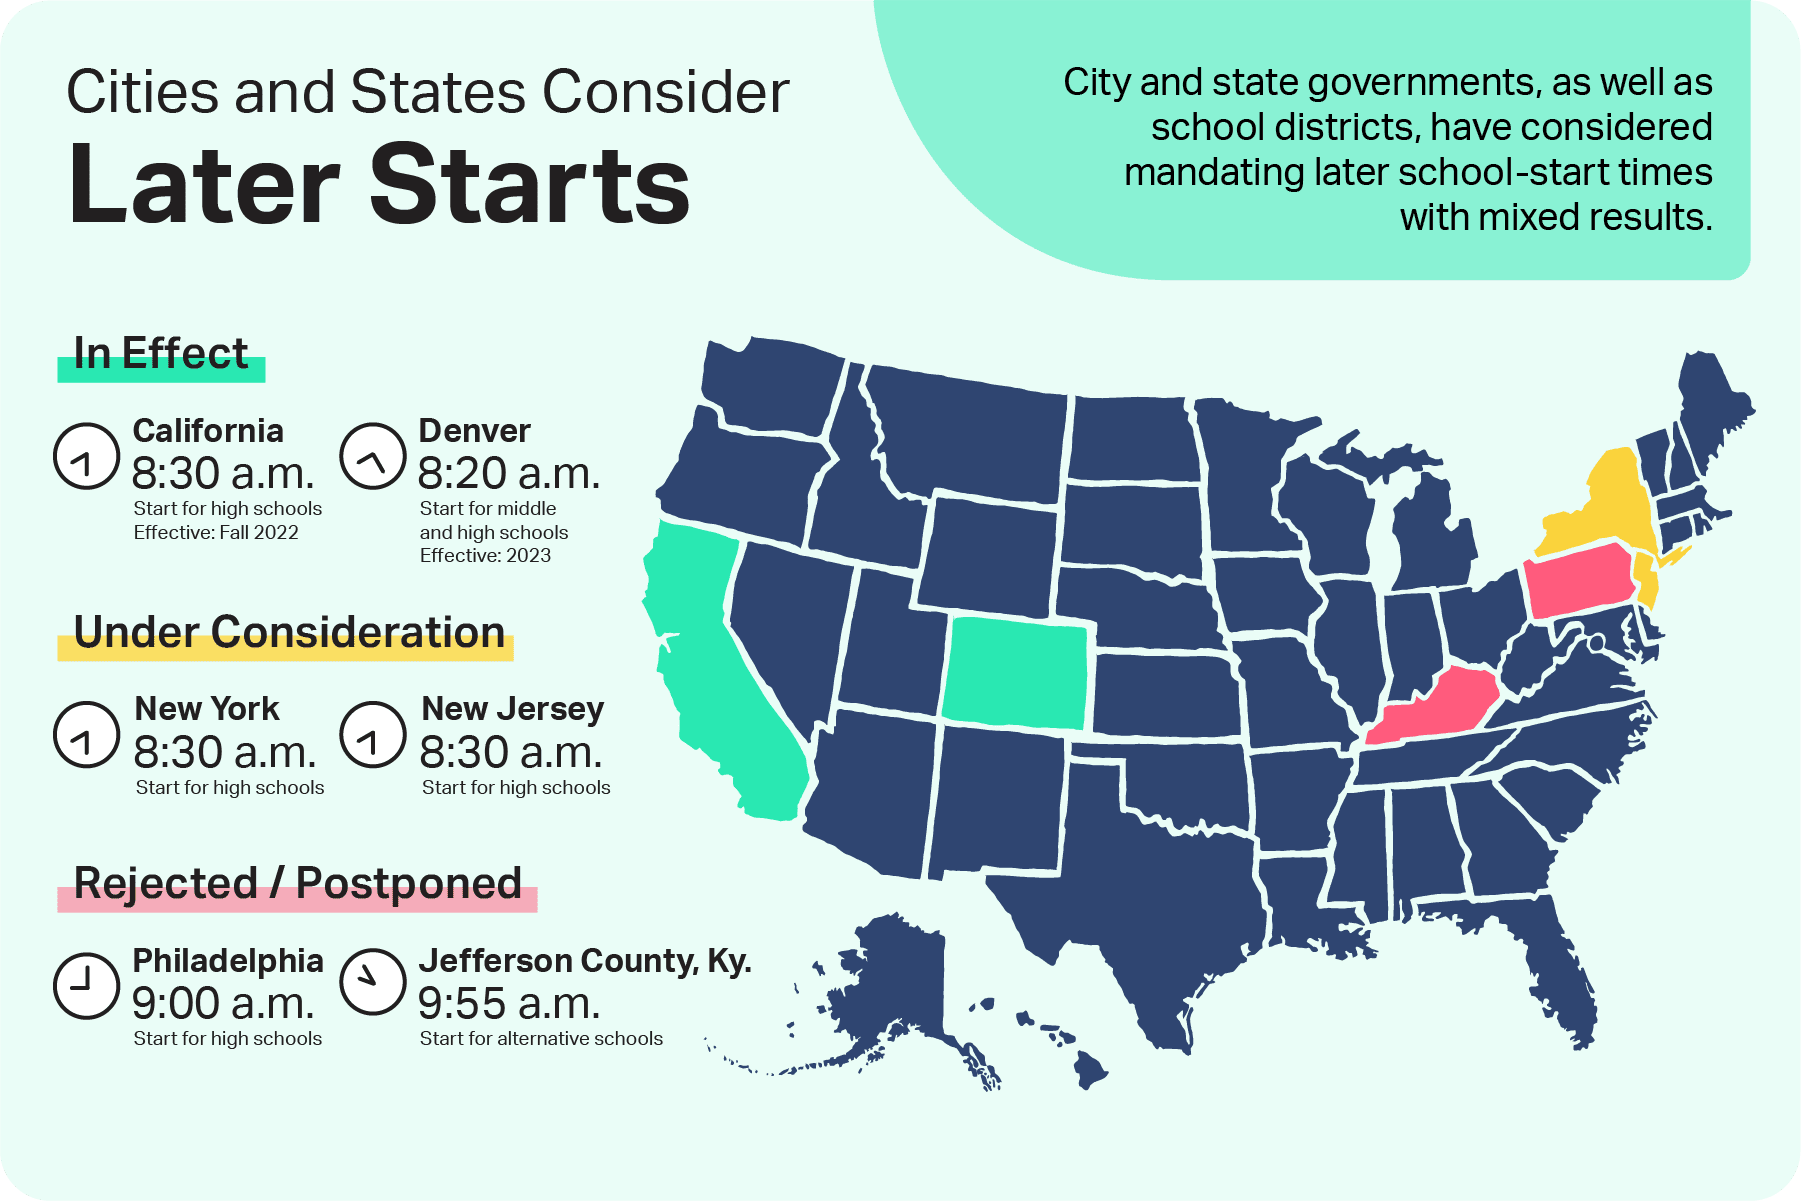 Cities and States Consider Later School Start Times